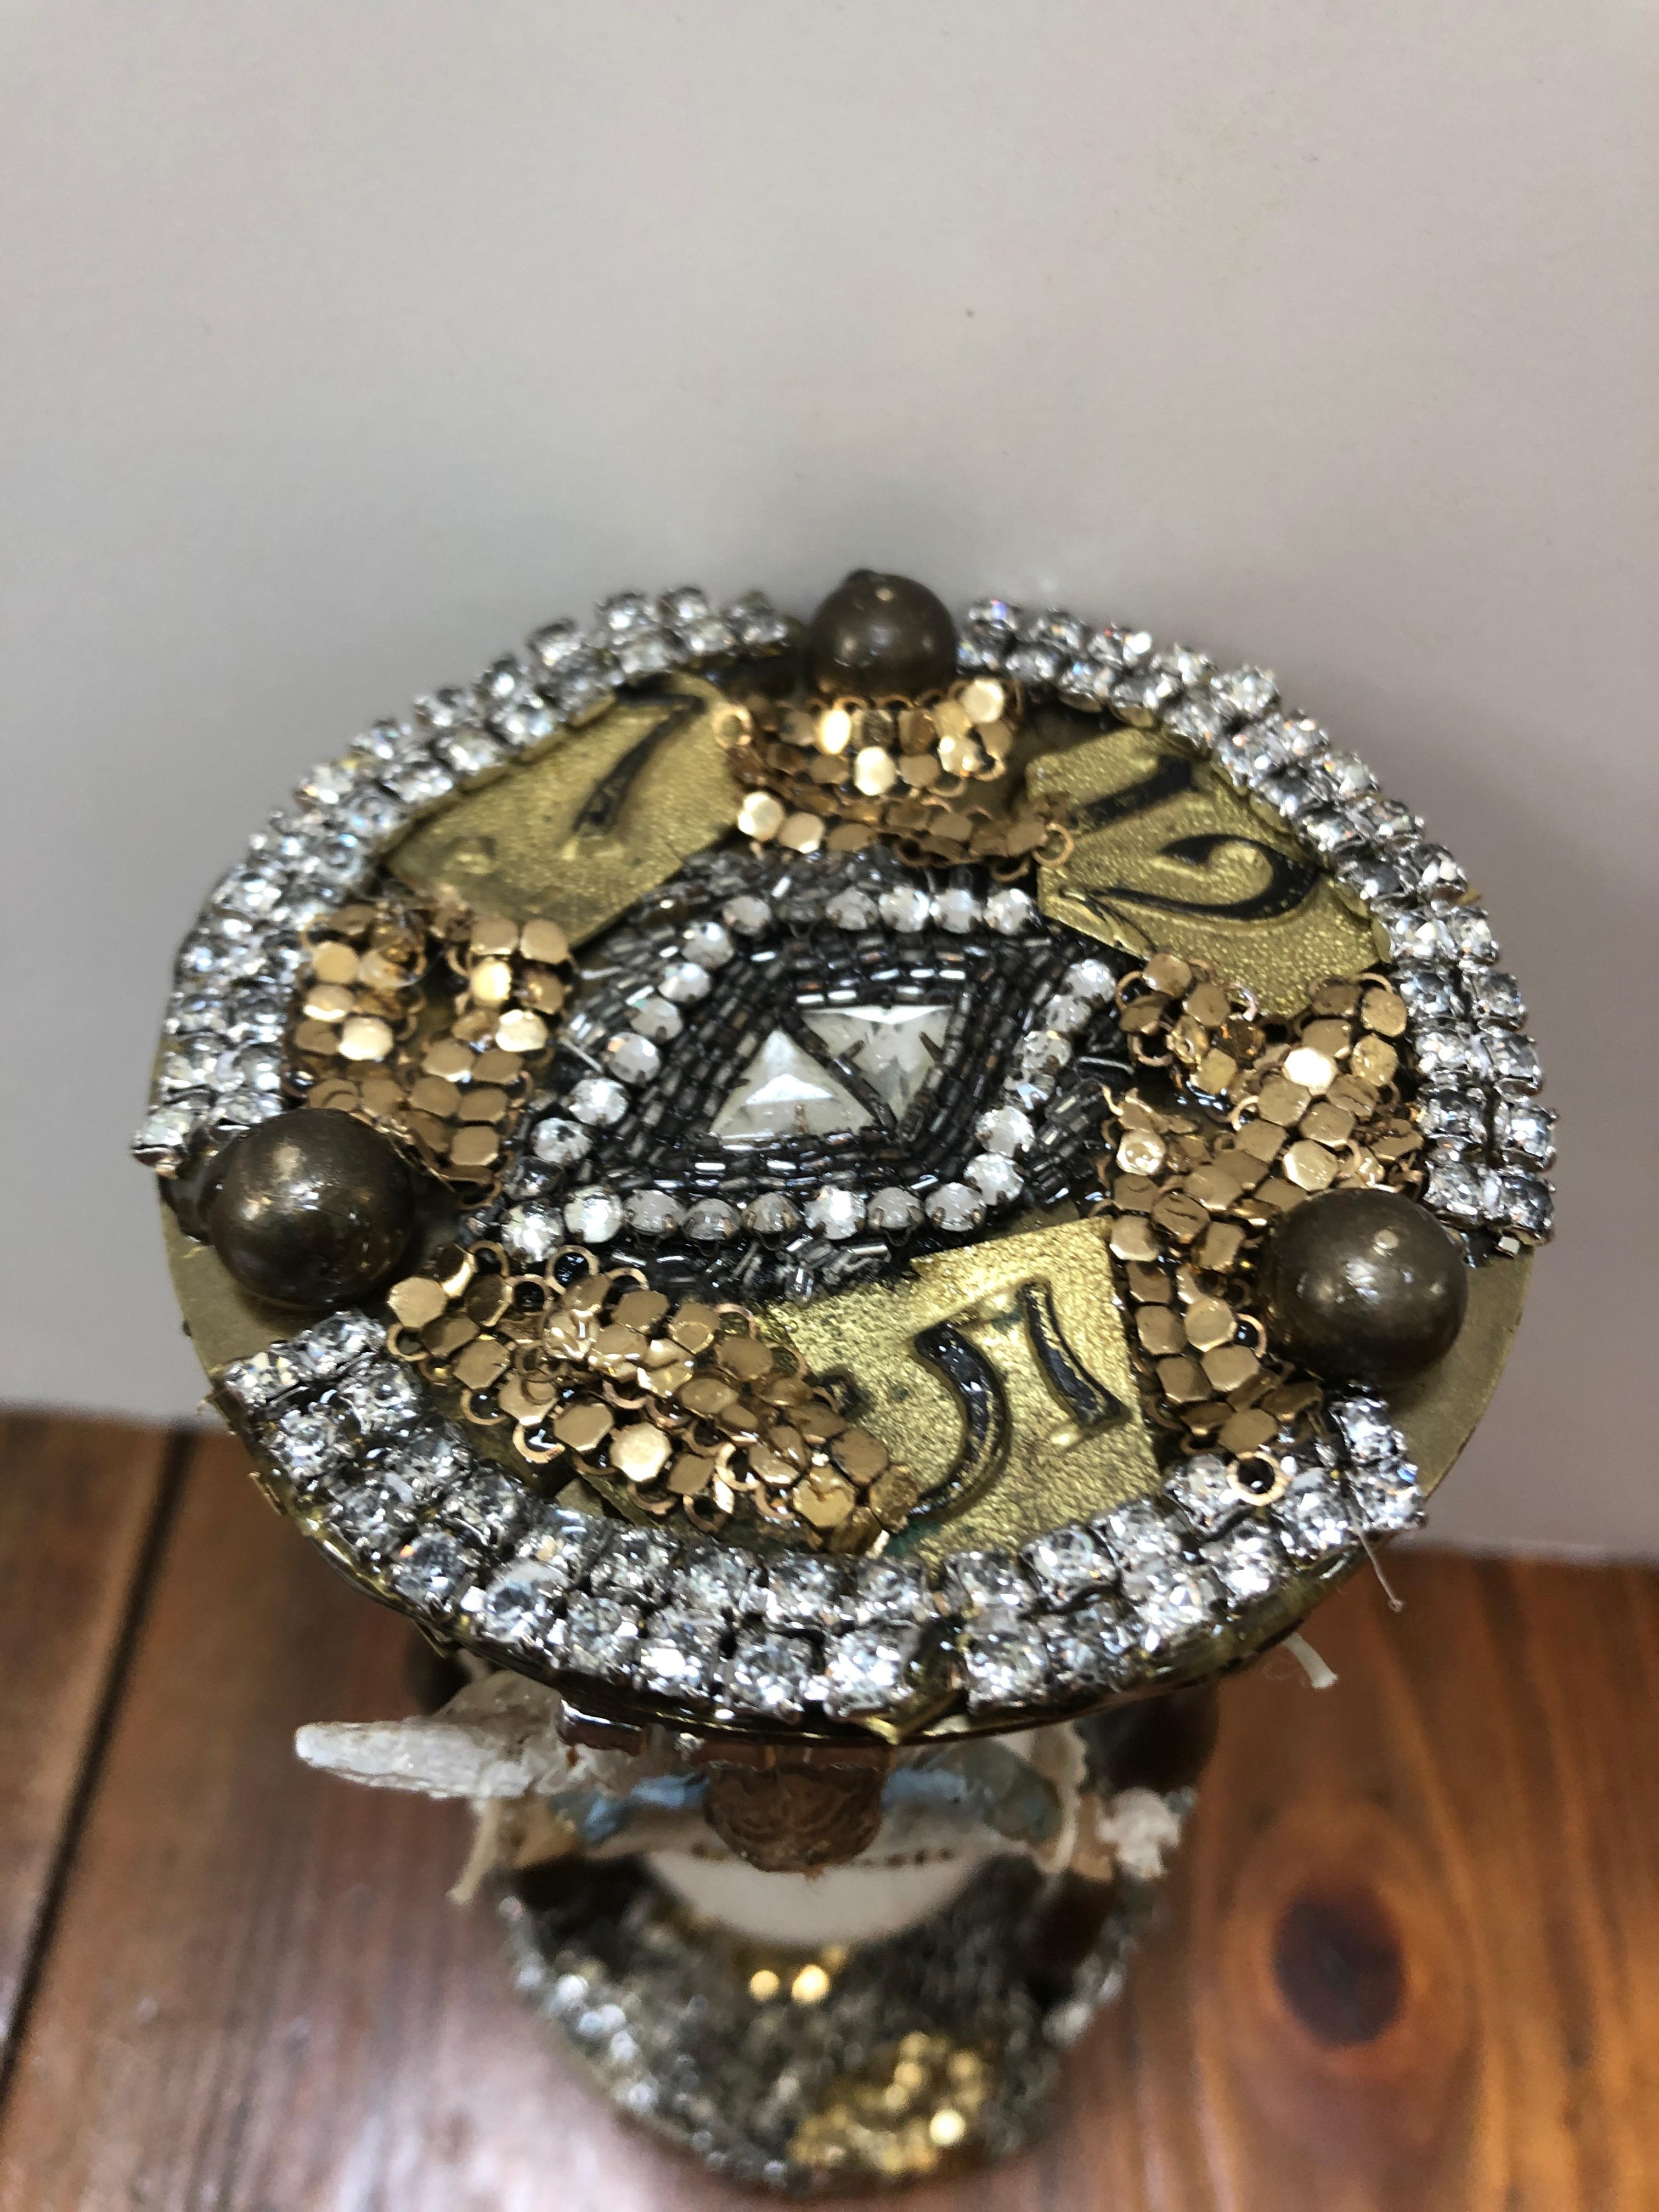 American Vintage Hourglass Mixed-Media Assemblage Sculpture For Sale